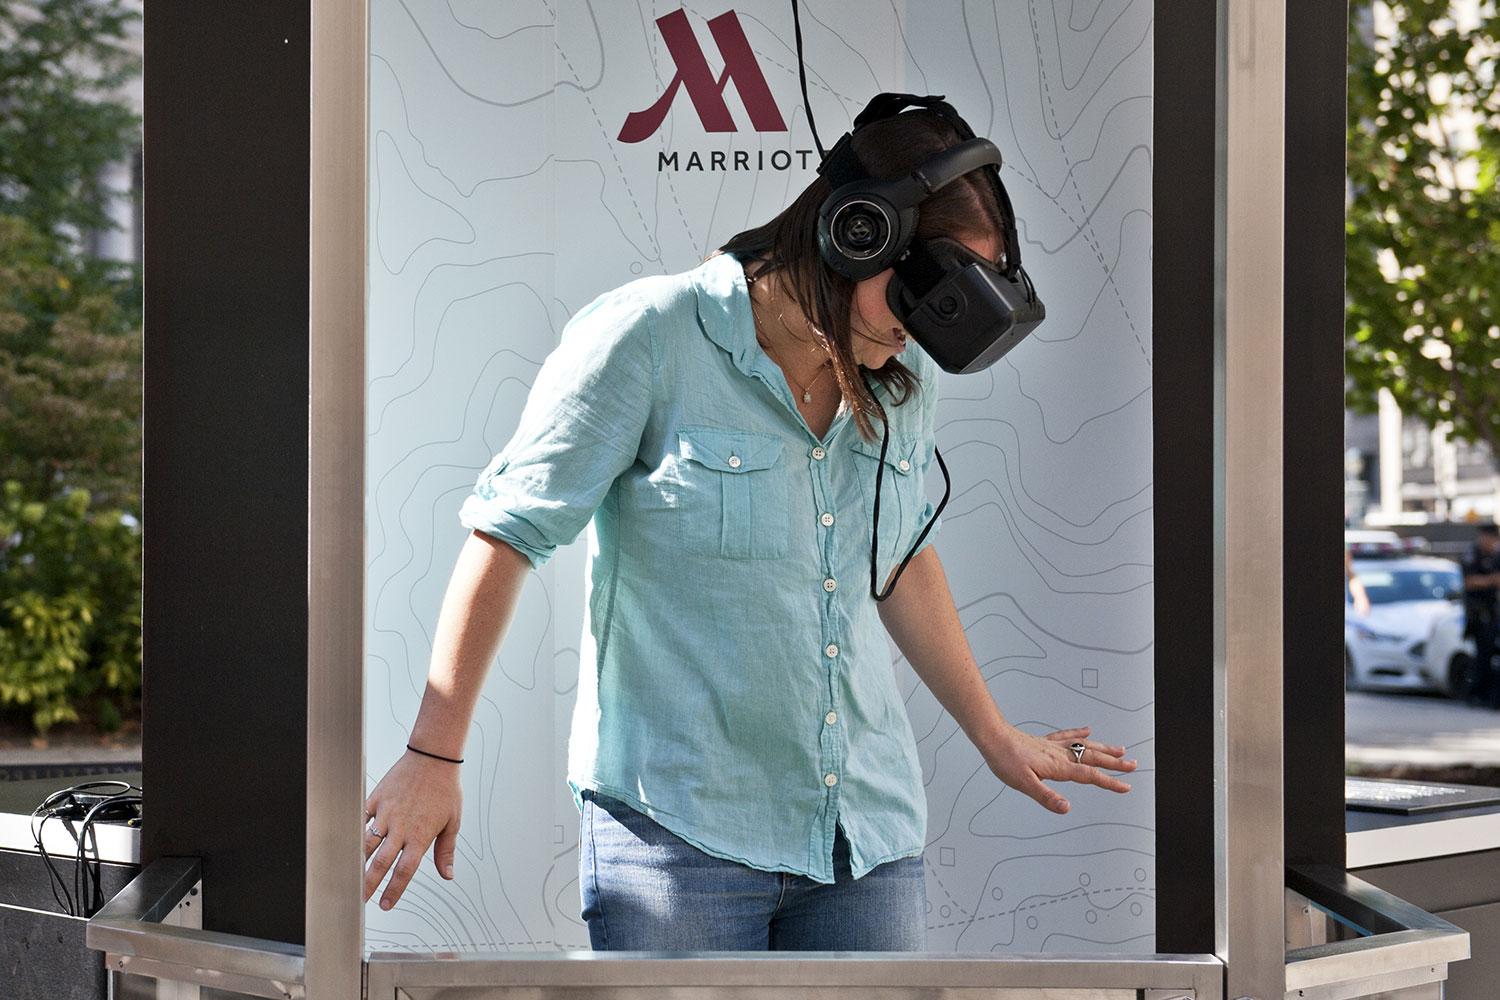 how virtual reality will change gaming movies sports travel marriott oculus 11